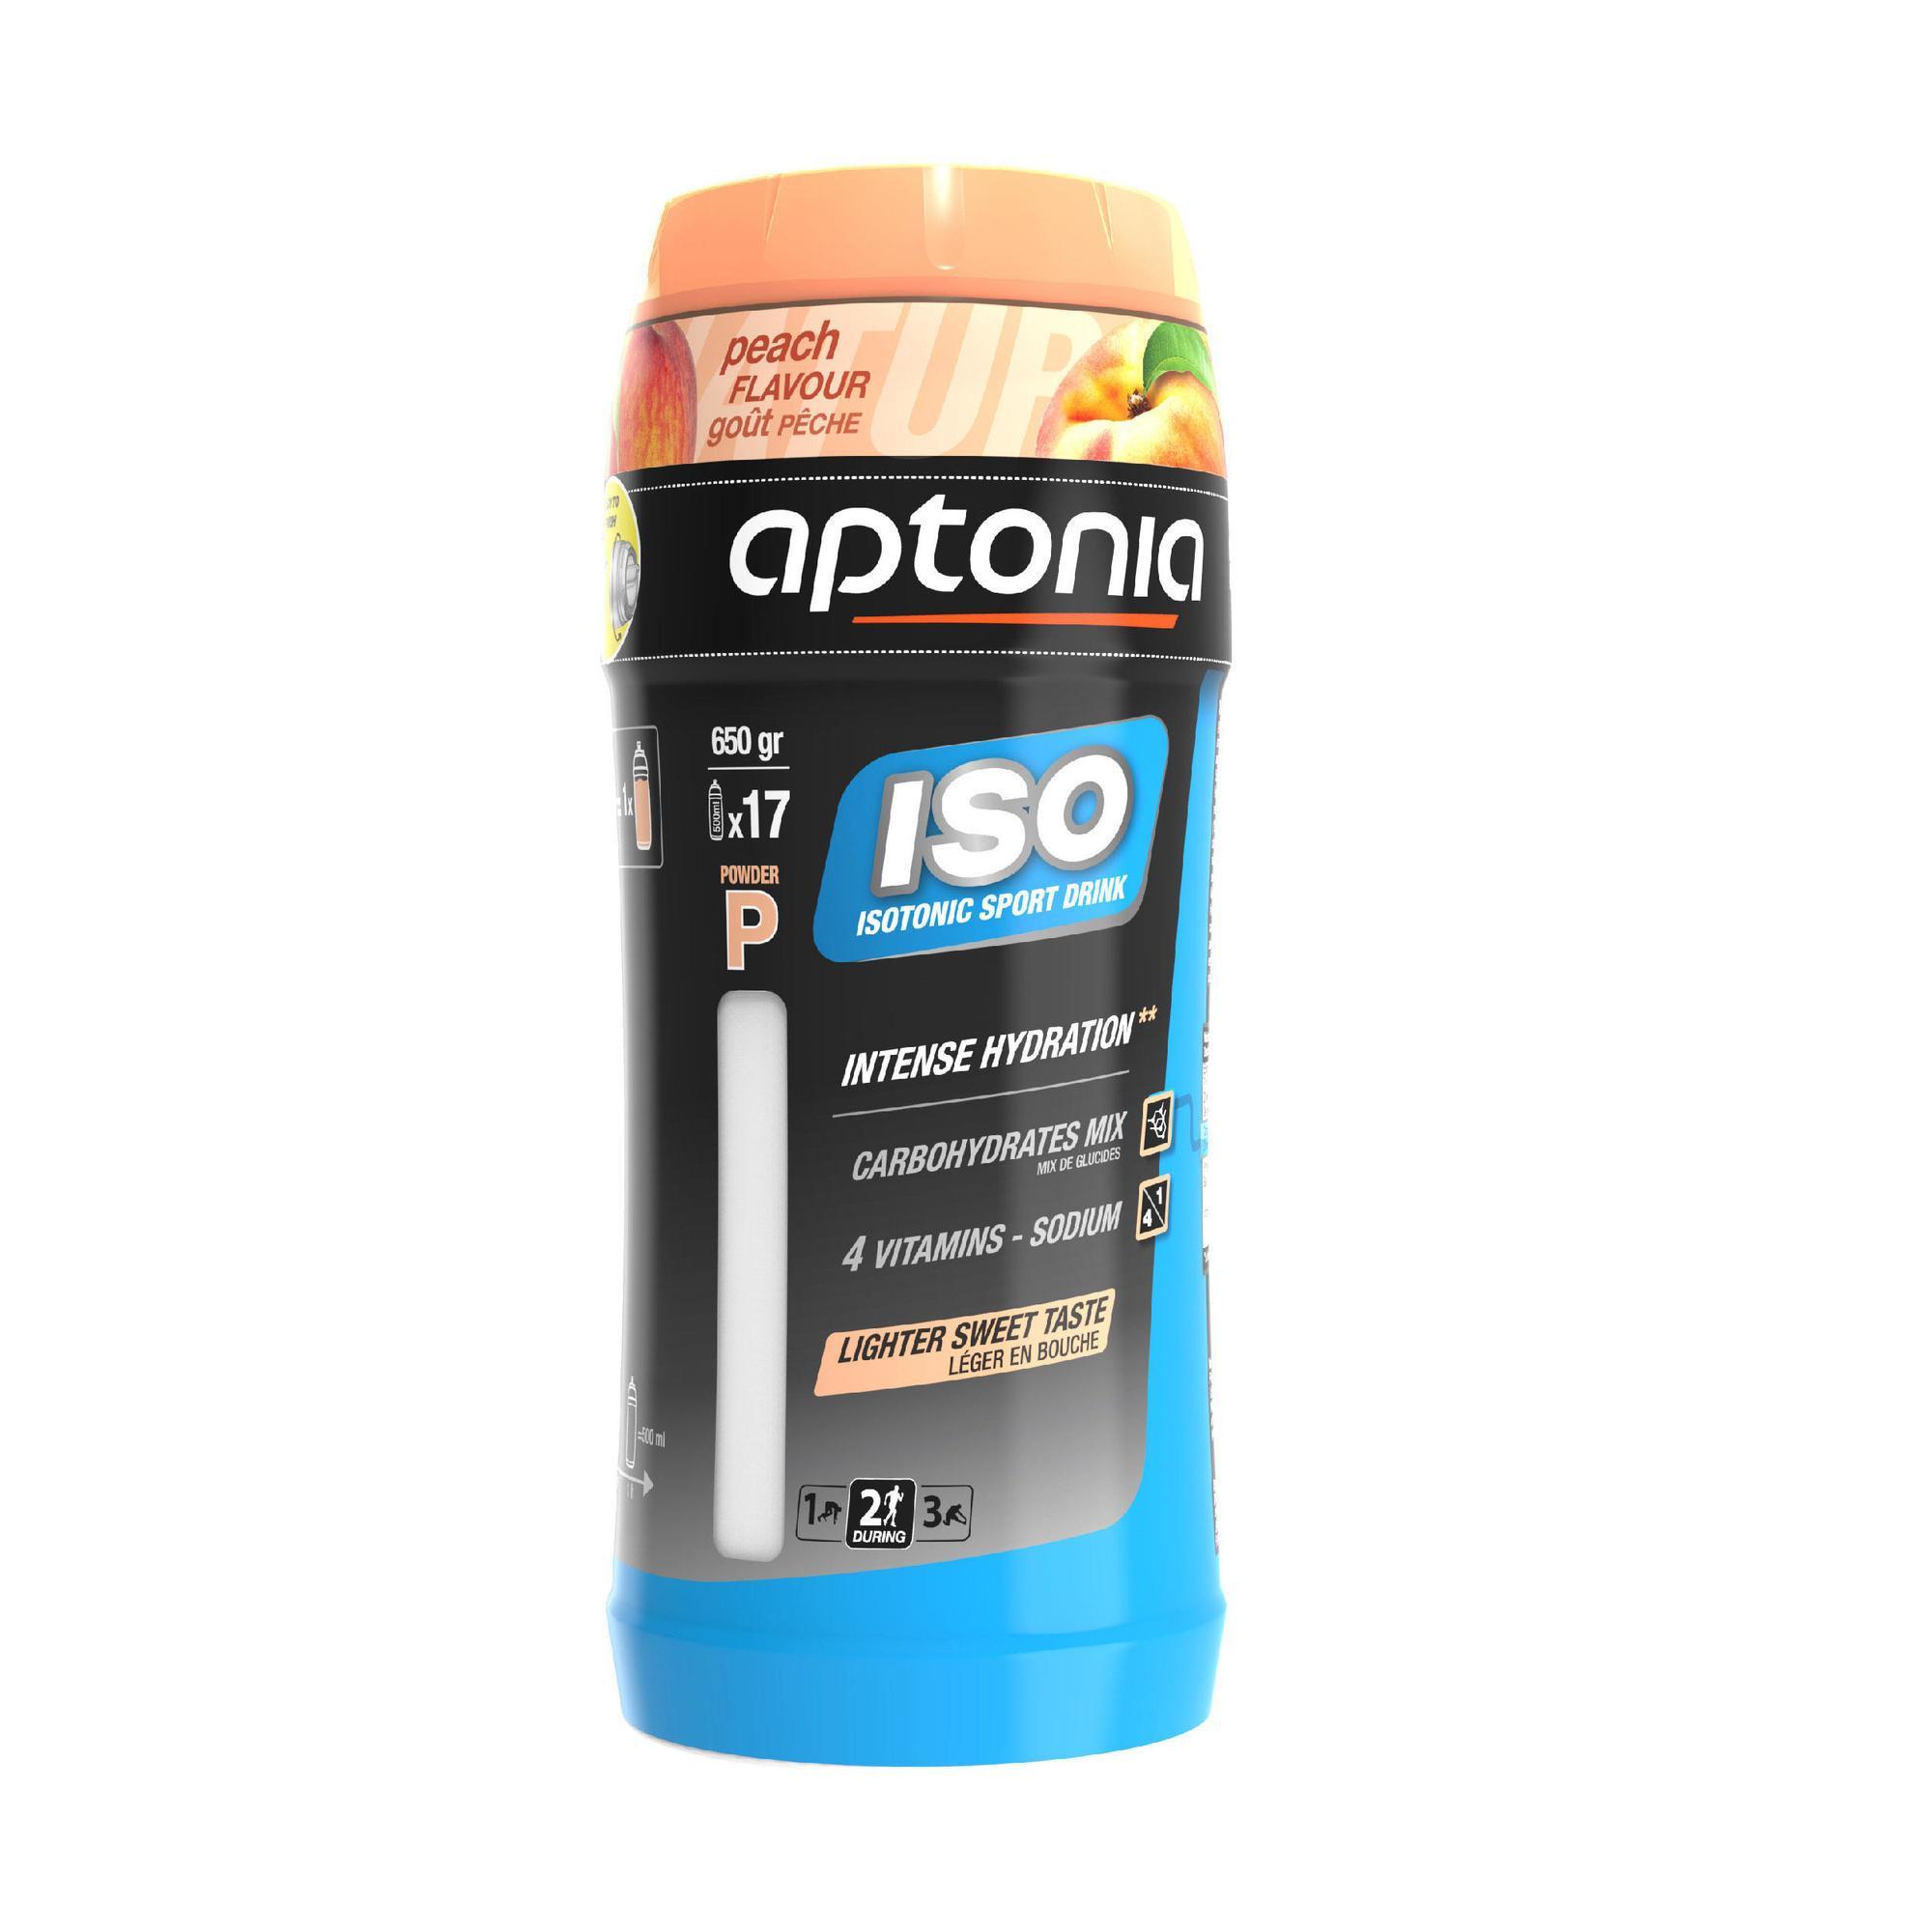 Iso Isotonic Drink Powder 650g - Mixed 